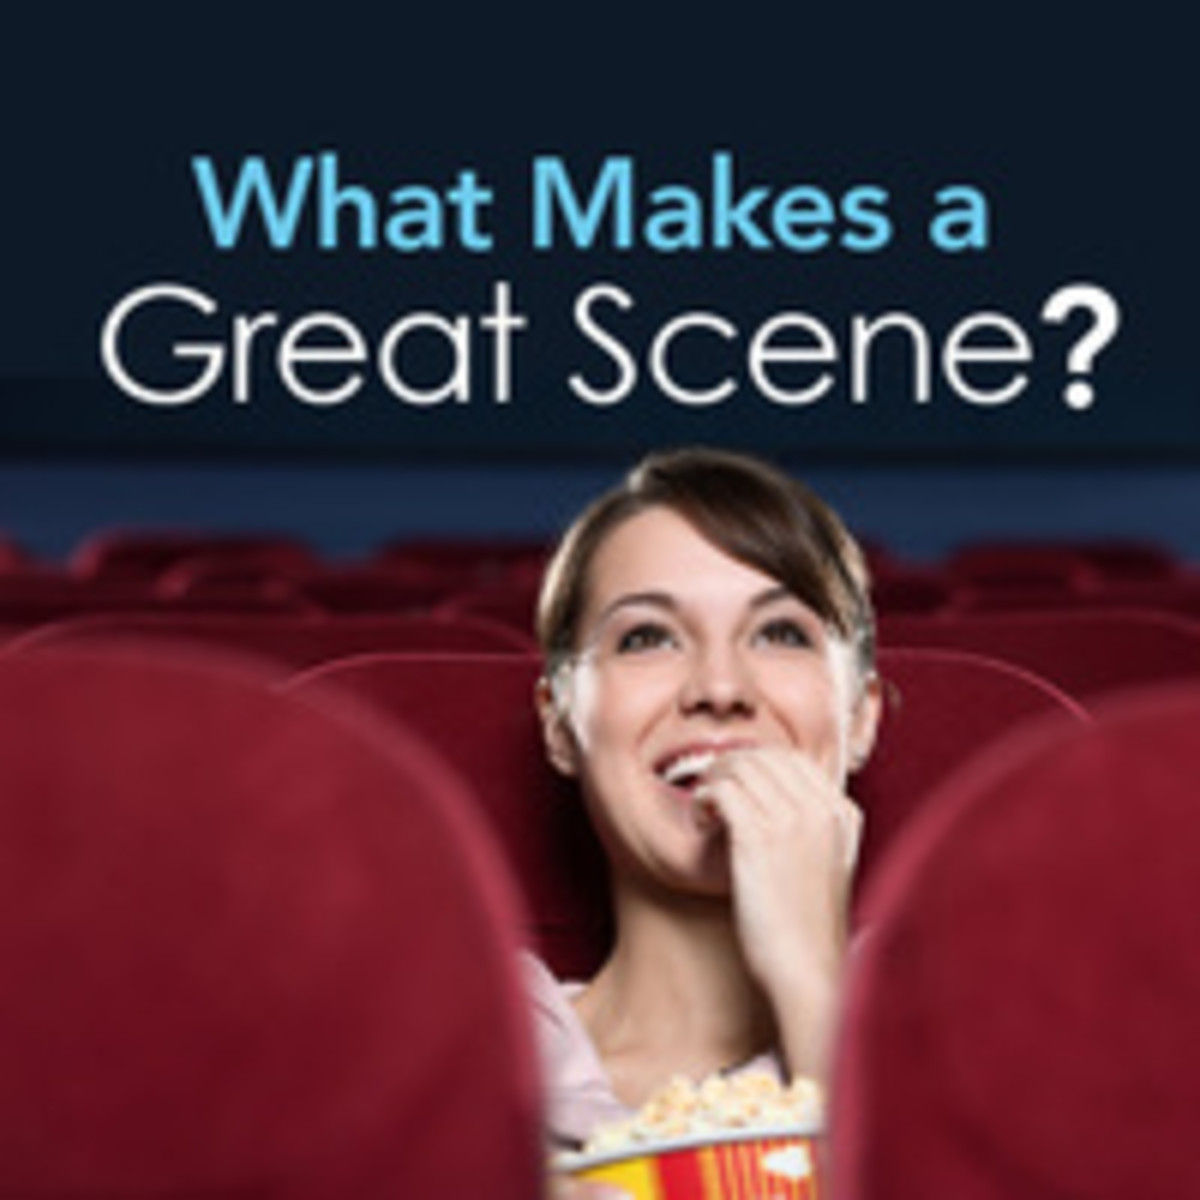 What makes a great scene?